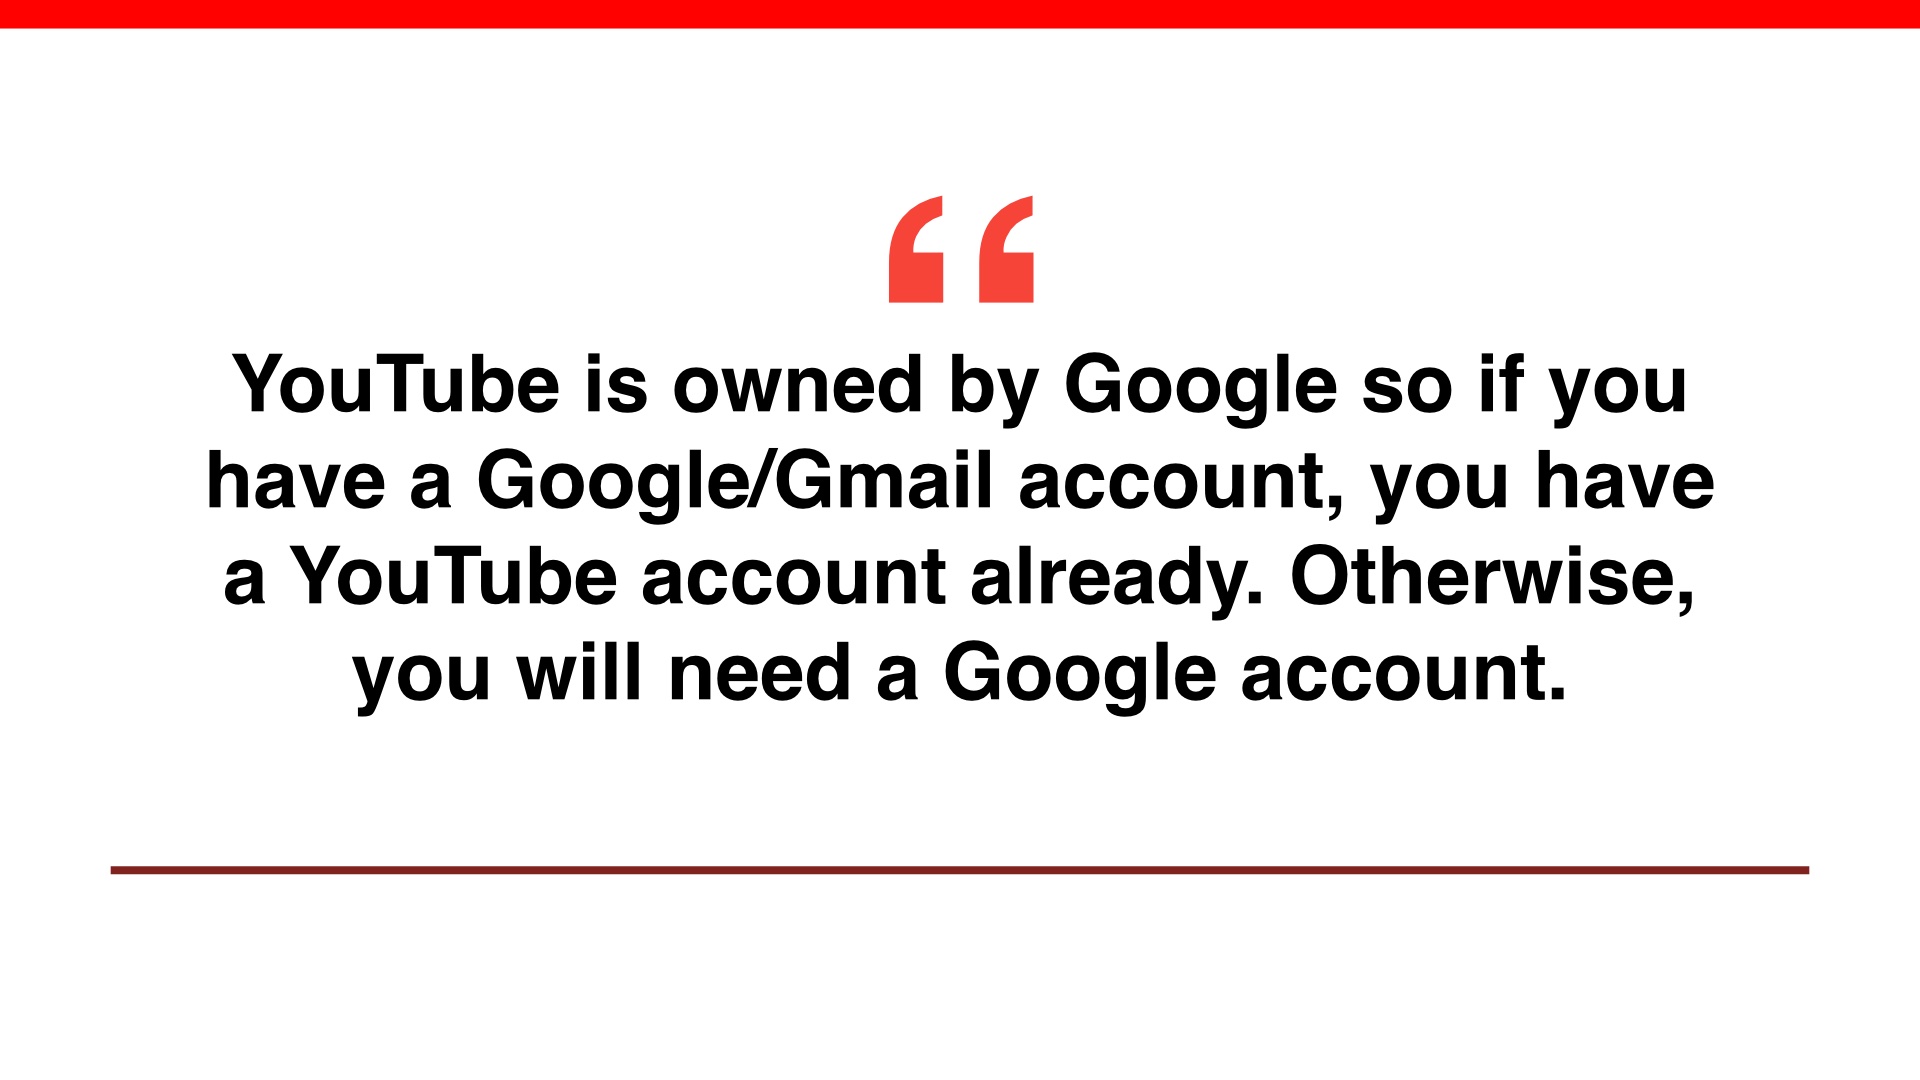 Large quote 'YouTube is owneâ€œd by Google so if you have a Google/Gmail account, you have a YouTube account already. Otherwise, you will need a Google account.'